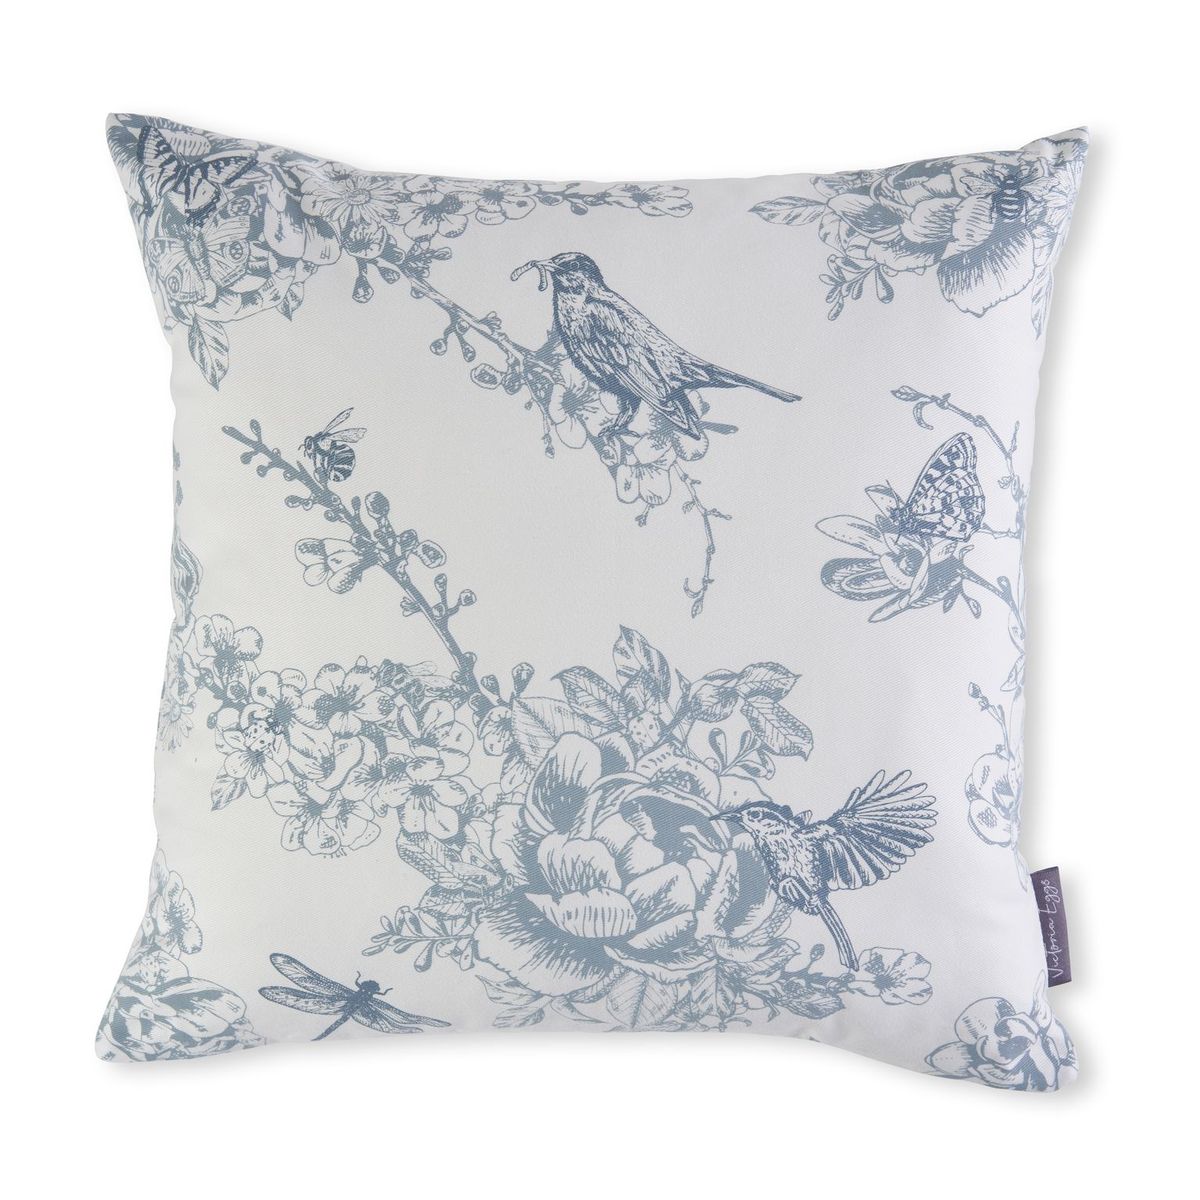 Wildlife in Spring Cushion Cover